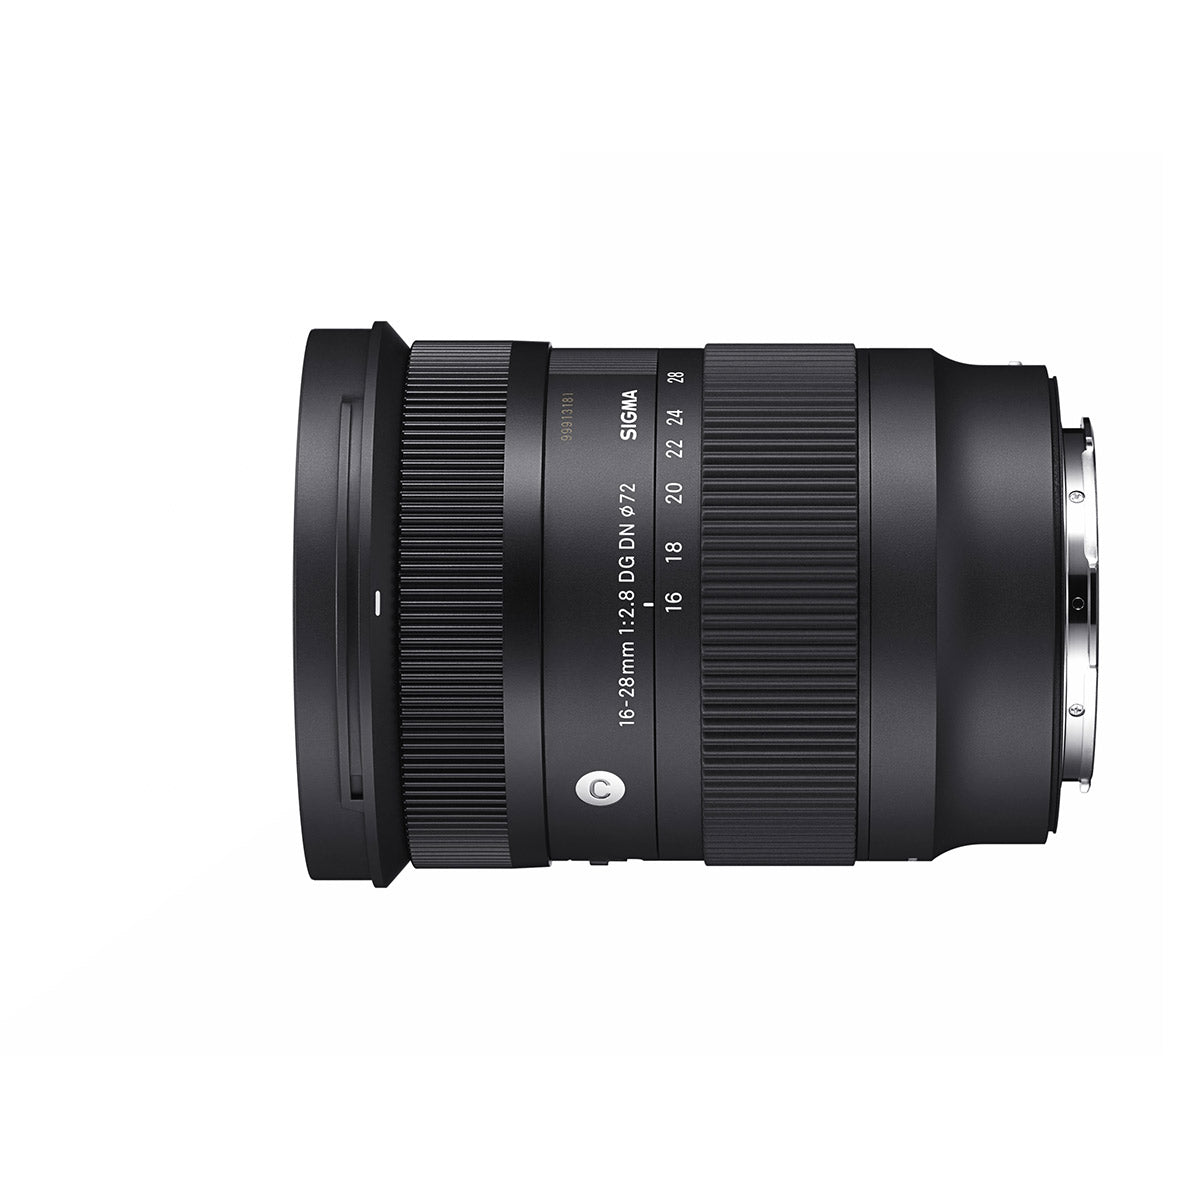 Sigma 16-28mm f/2.8 DG DN Contemporary Lens for Sony FE